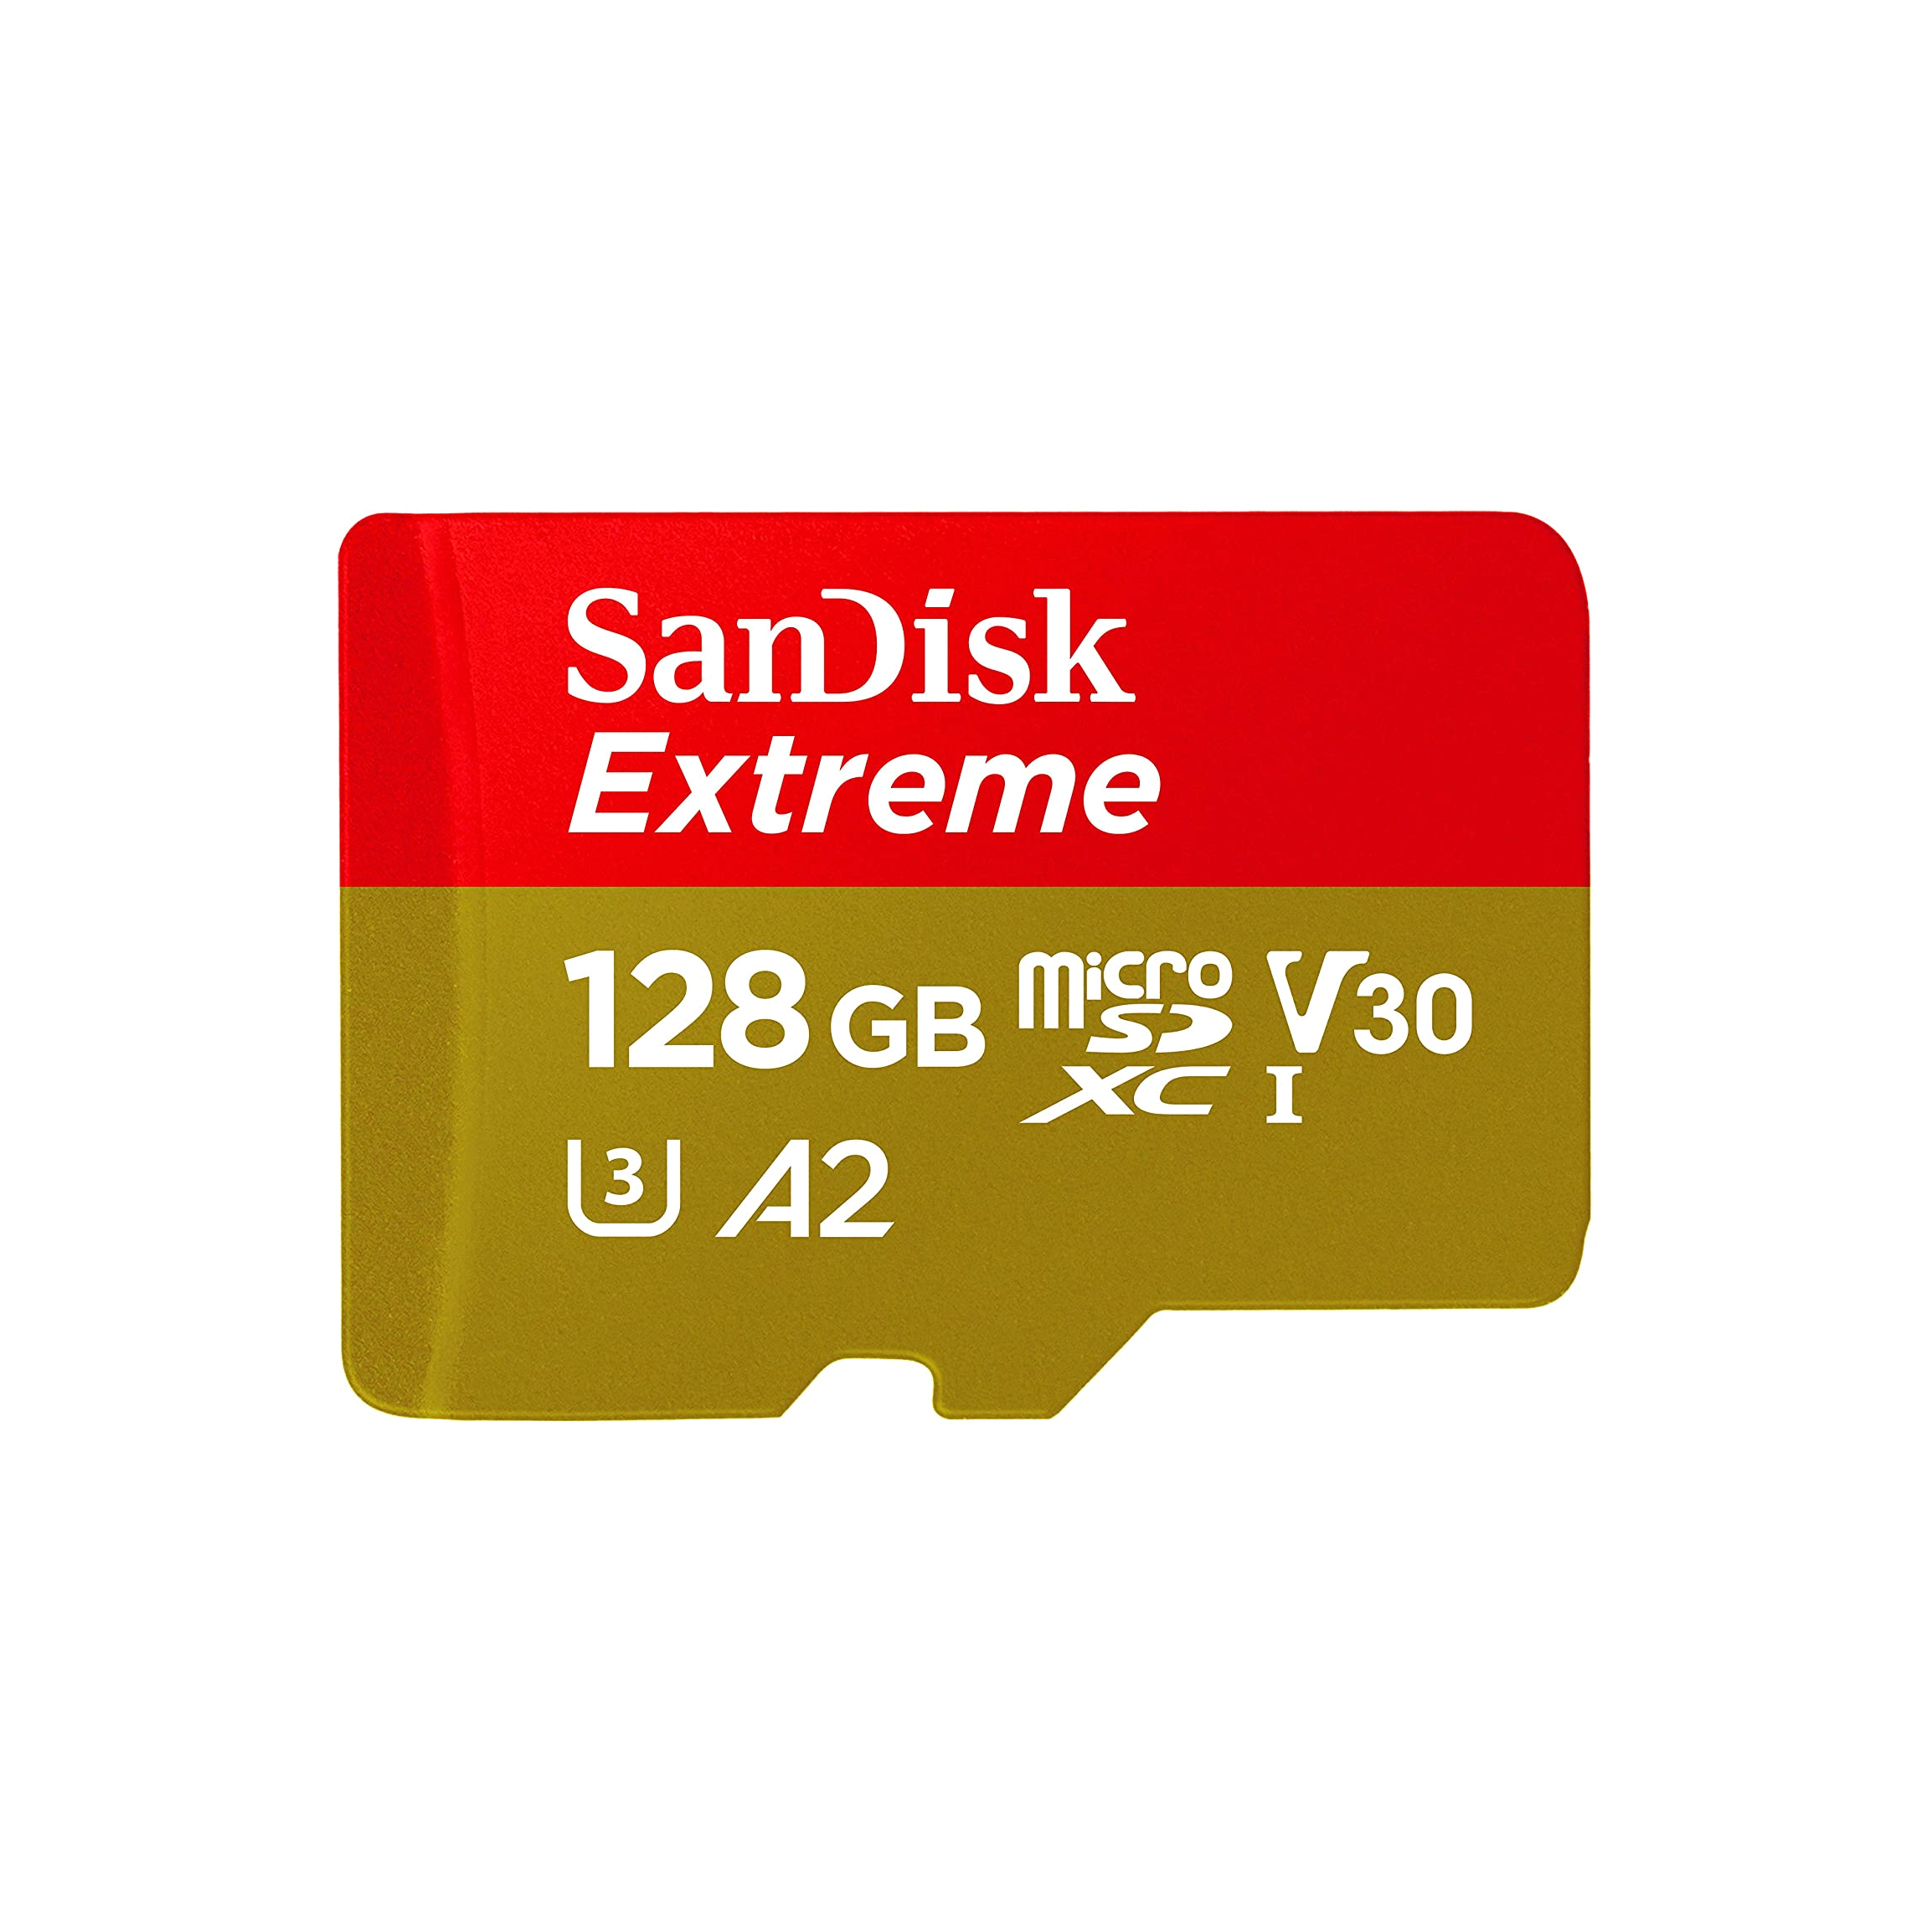 SanDisk Extreme Micro-SD - 128GB UHS-3 160MB/s (Class 10)